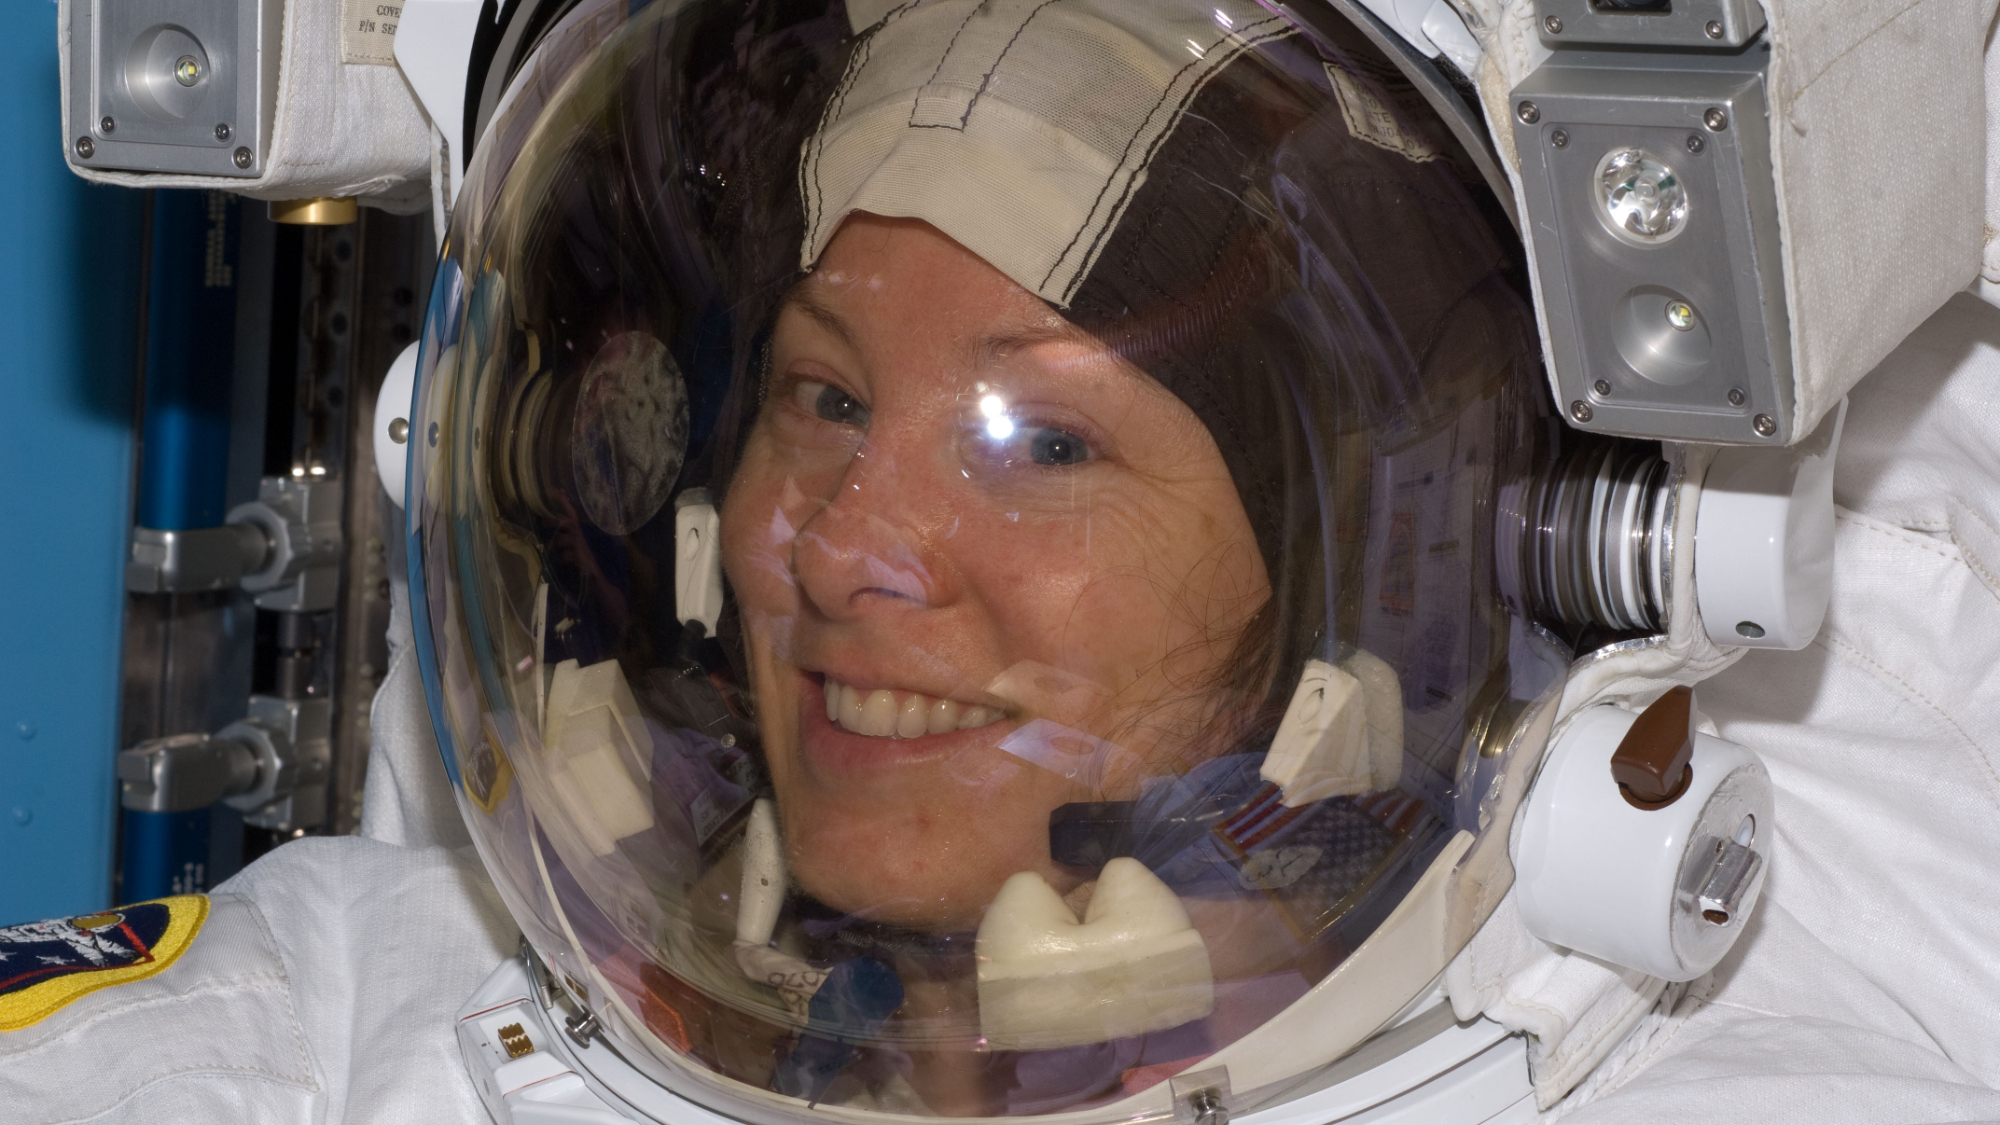 NASA astronaut assigned to